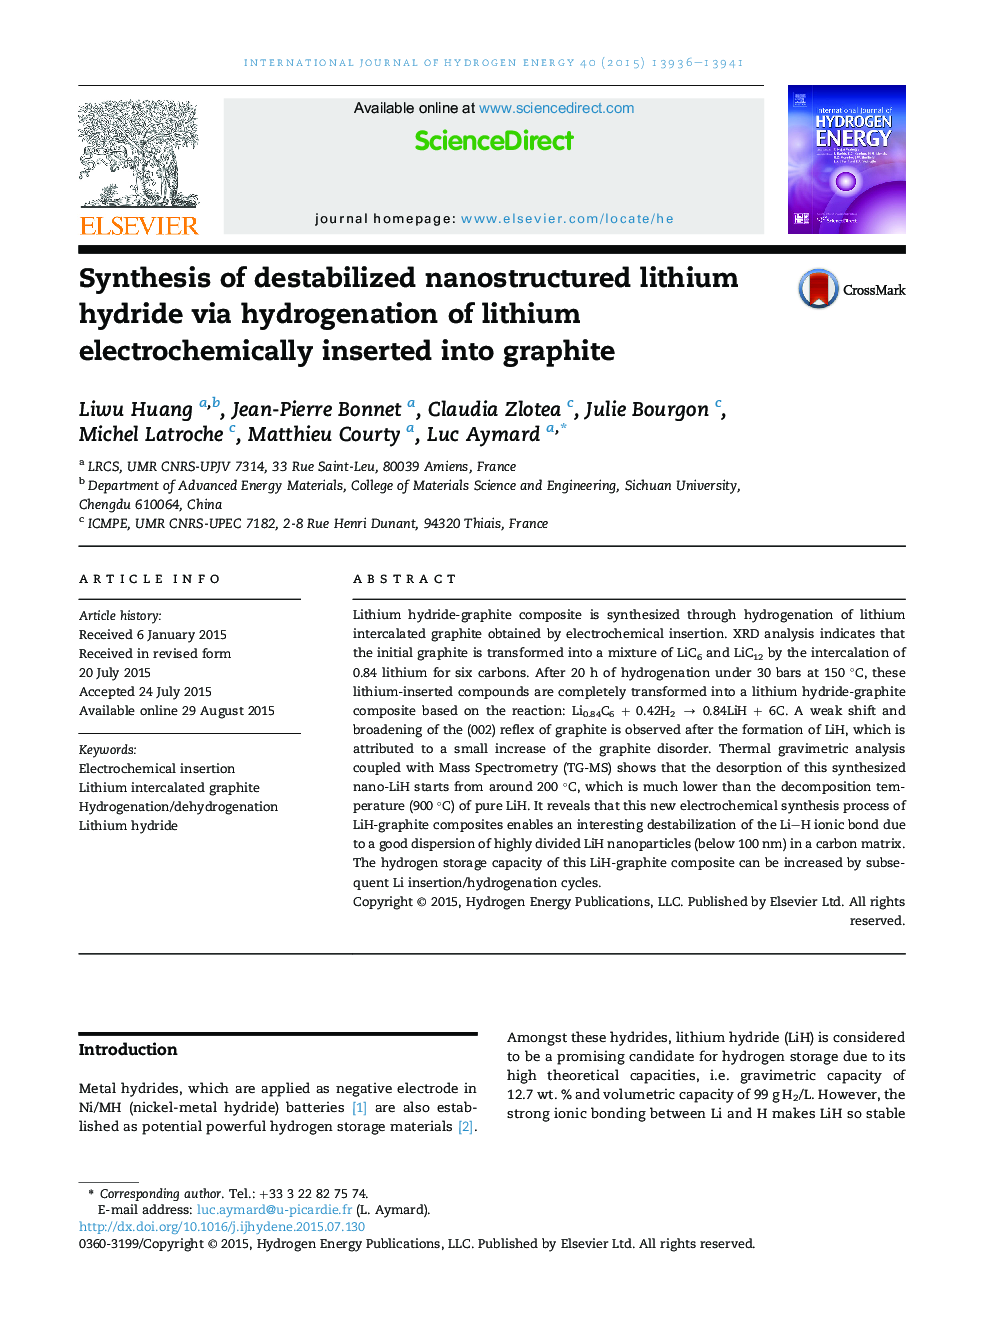 Synthesis of destabilized nanostructured lithium hydride via hydrogenation of lithium electrochemically inserted into graphite